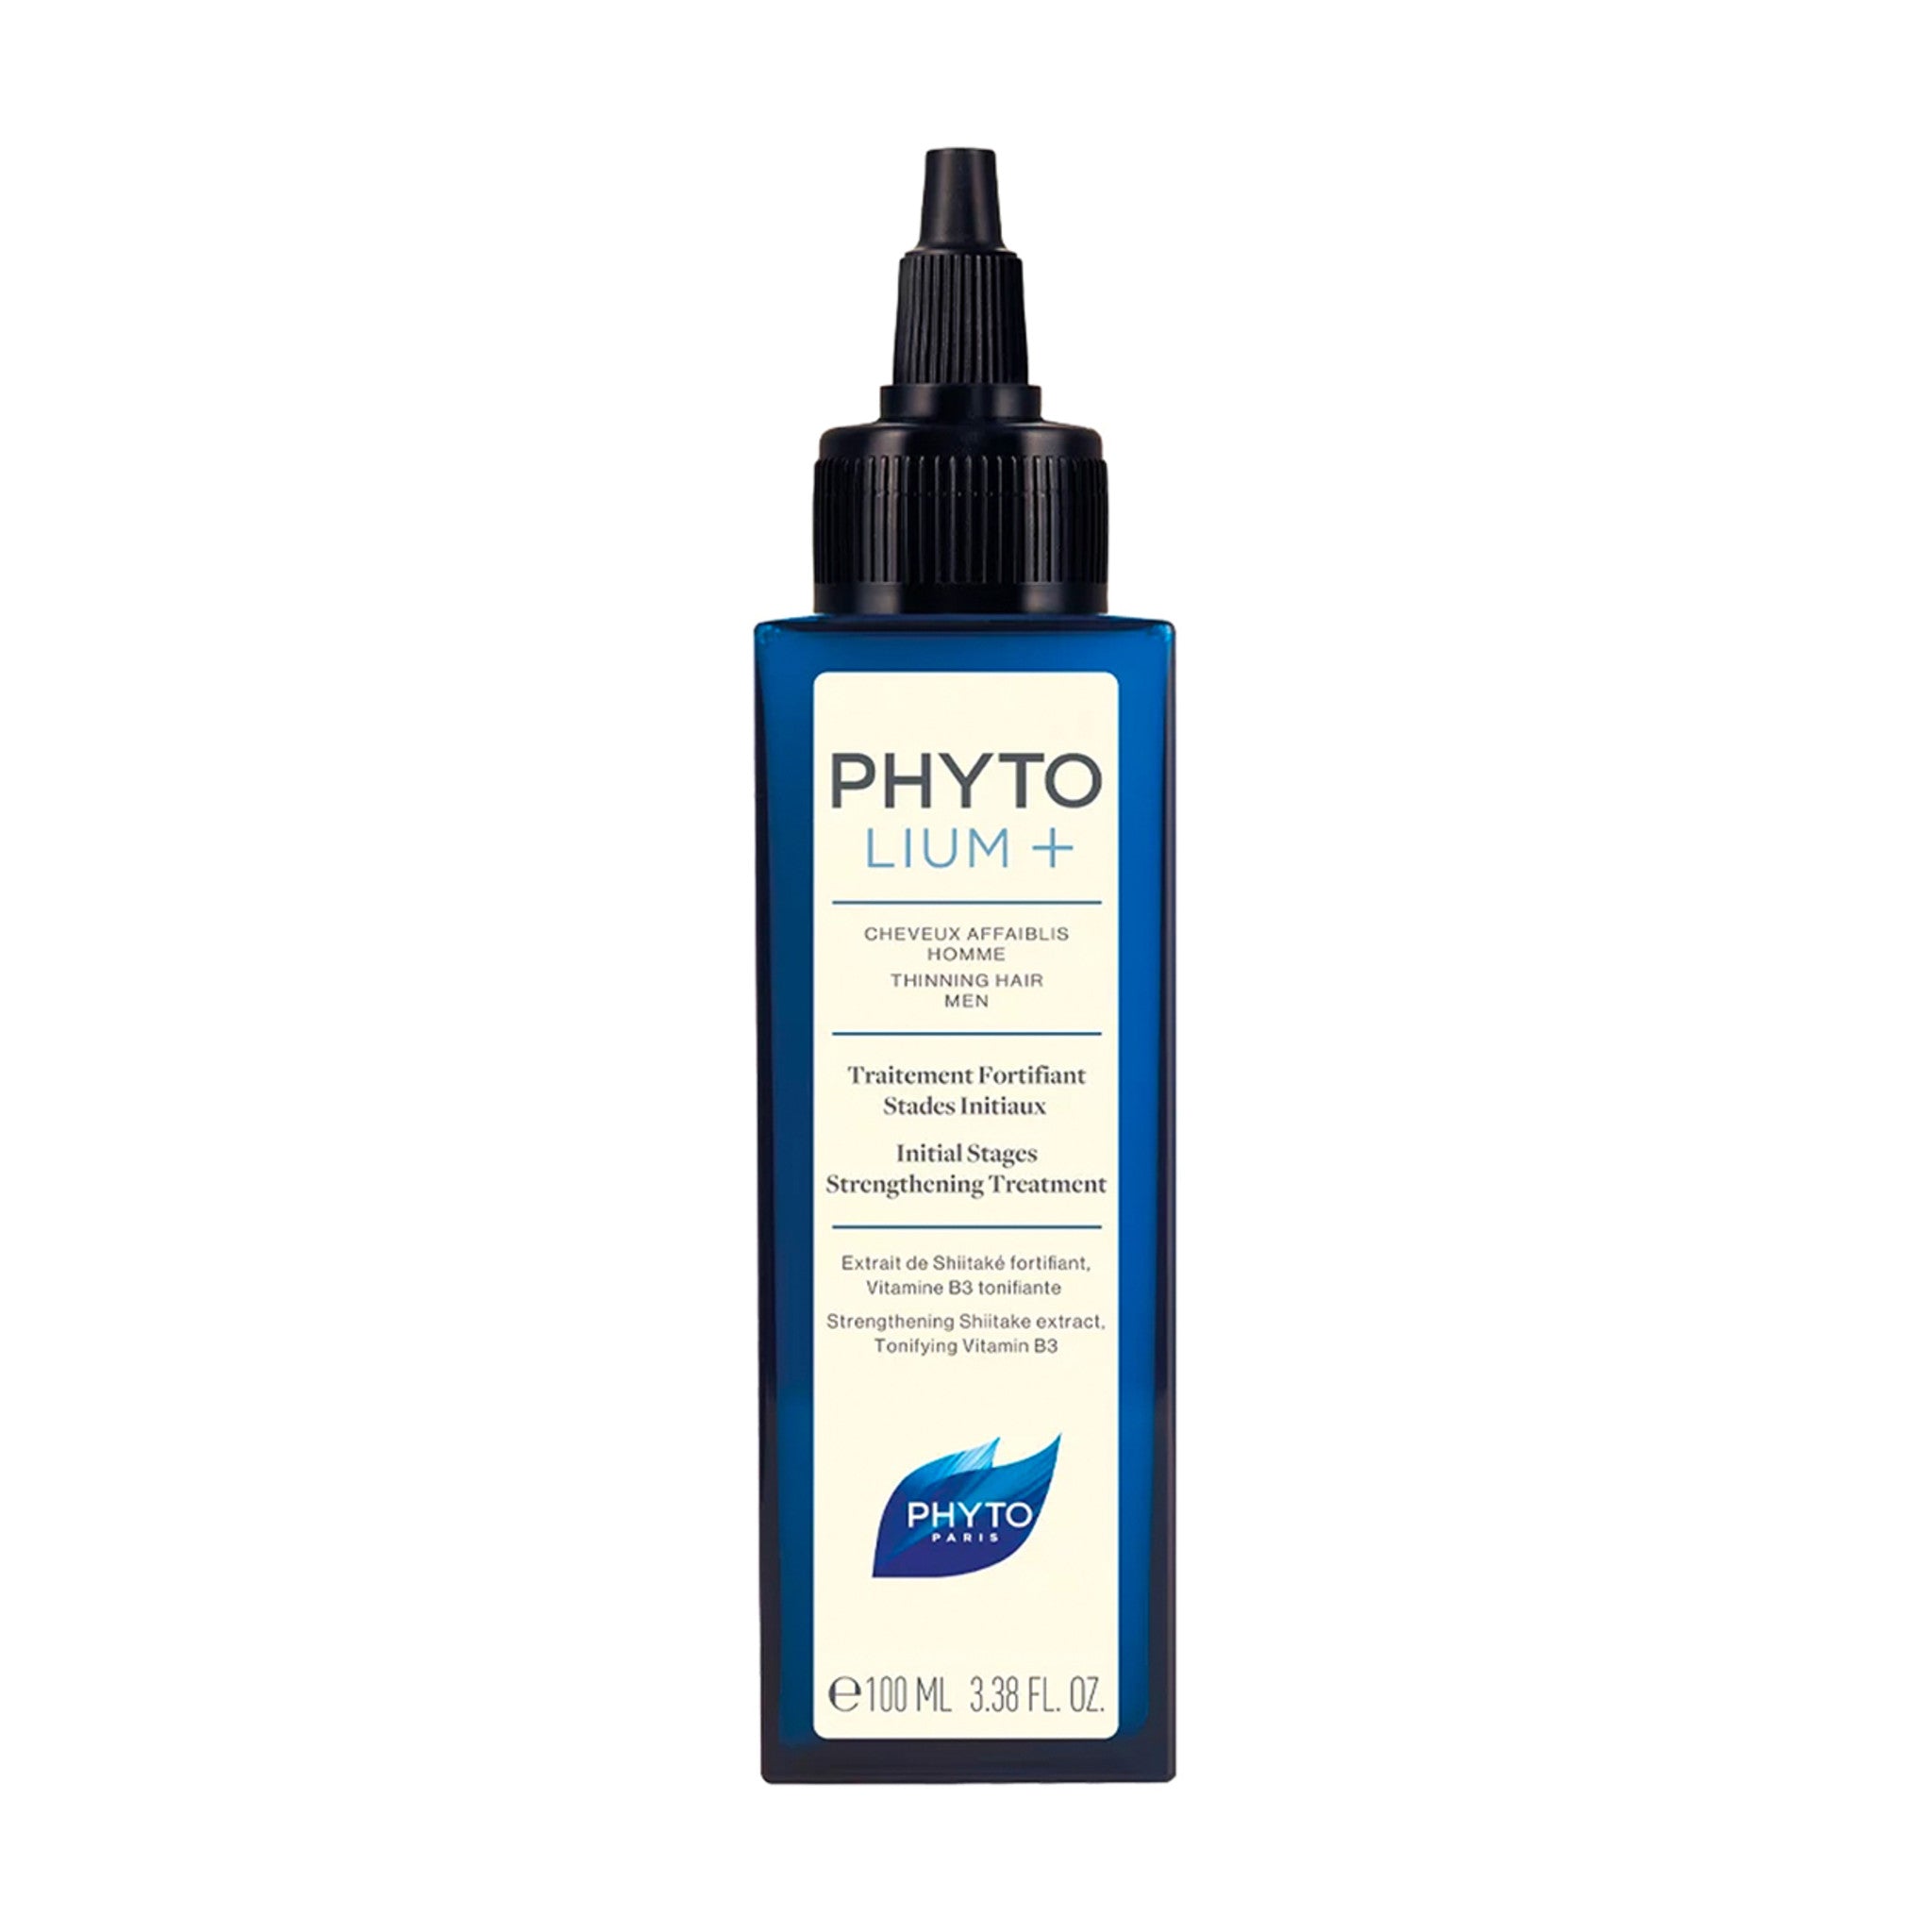 Phyto Phytolium+ Initial Stages Strengthening Treatment main image.